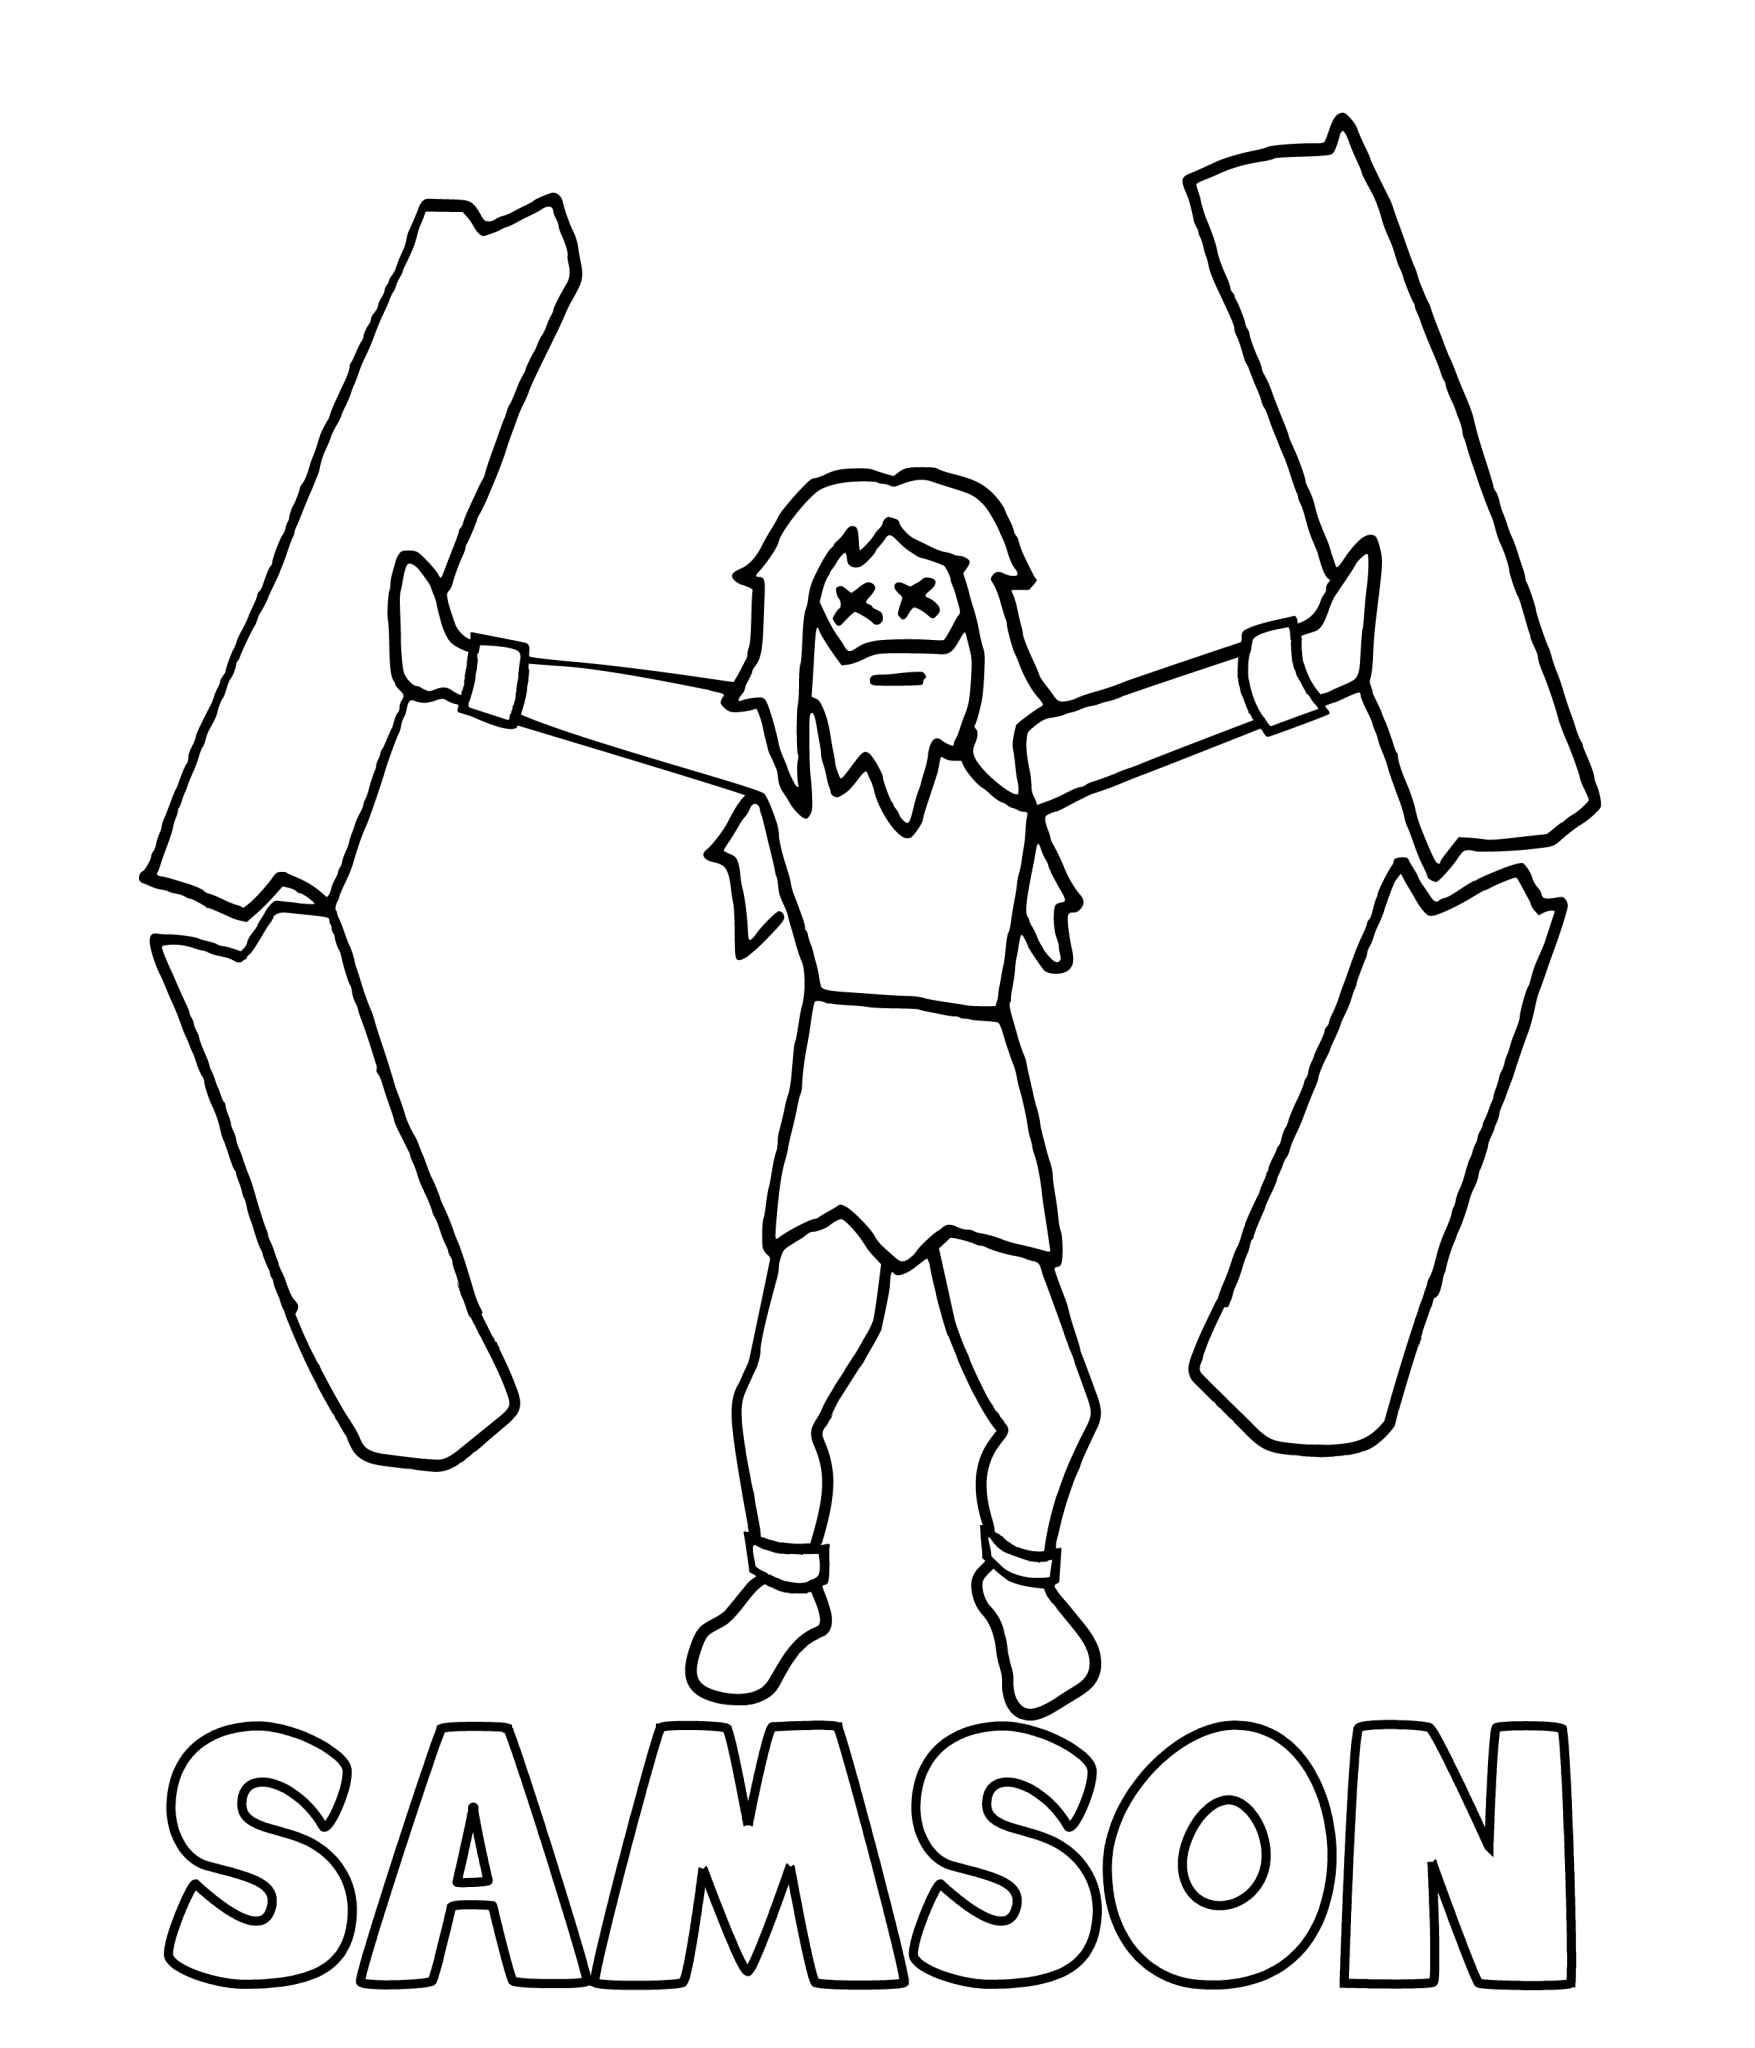 Printable Samson Coloring Pages Free For Kids And Adults